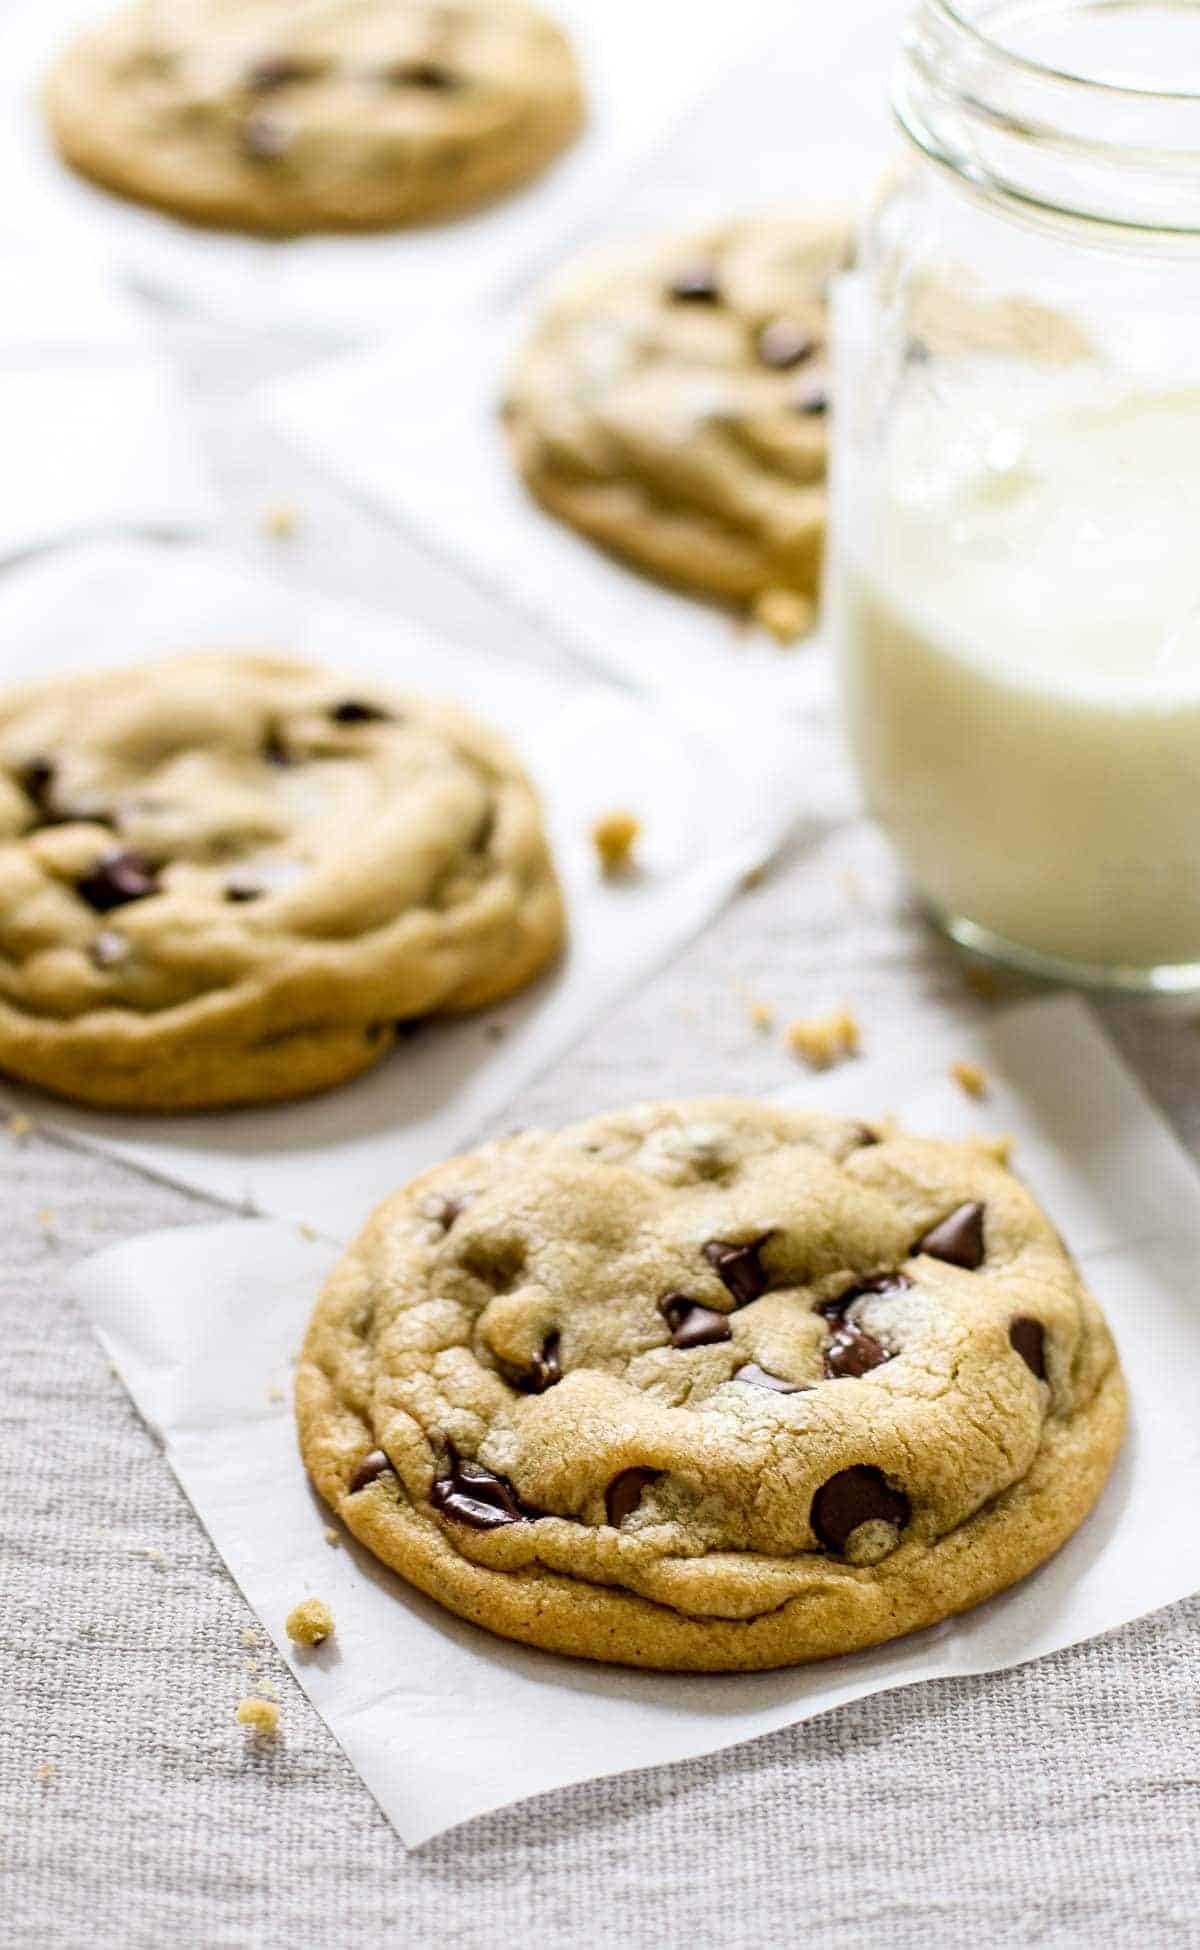 Chocolate chip cookies and a class of milk